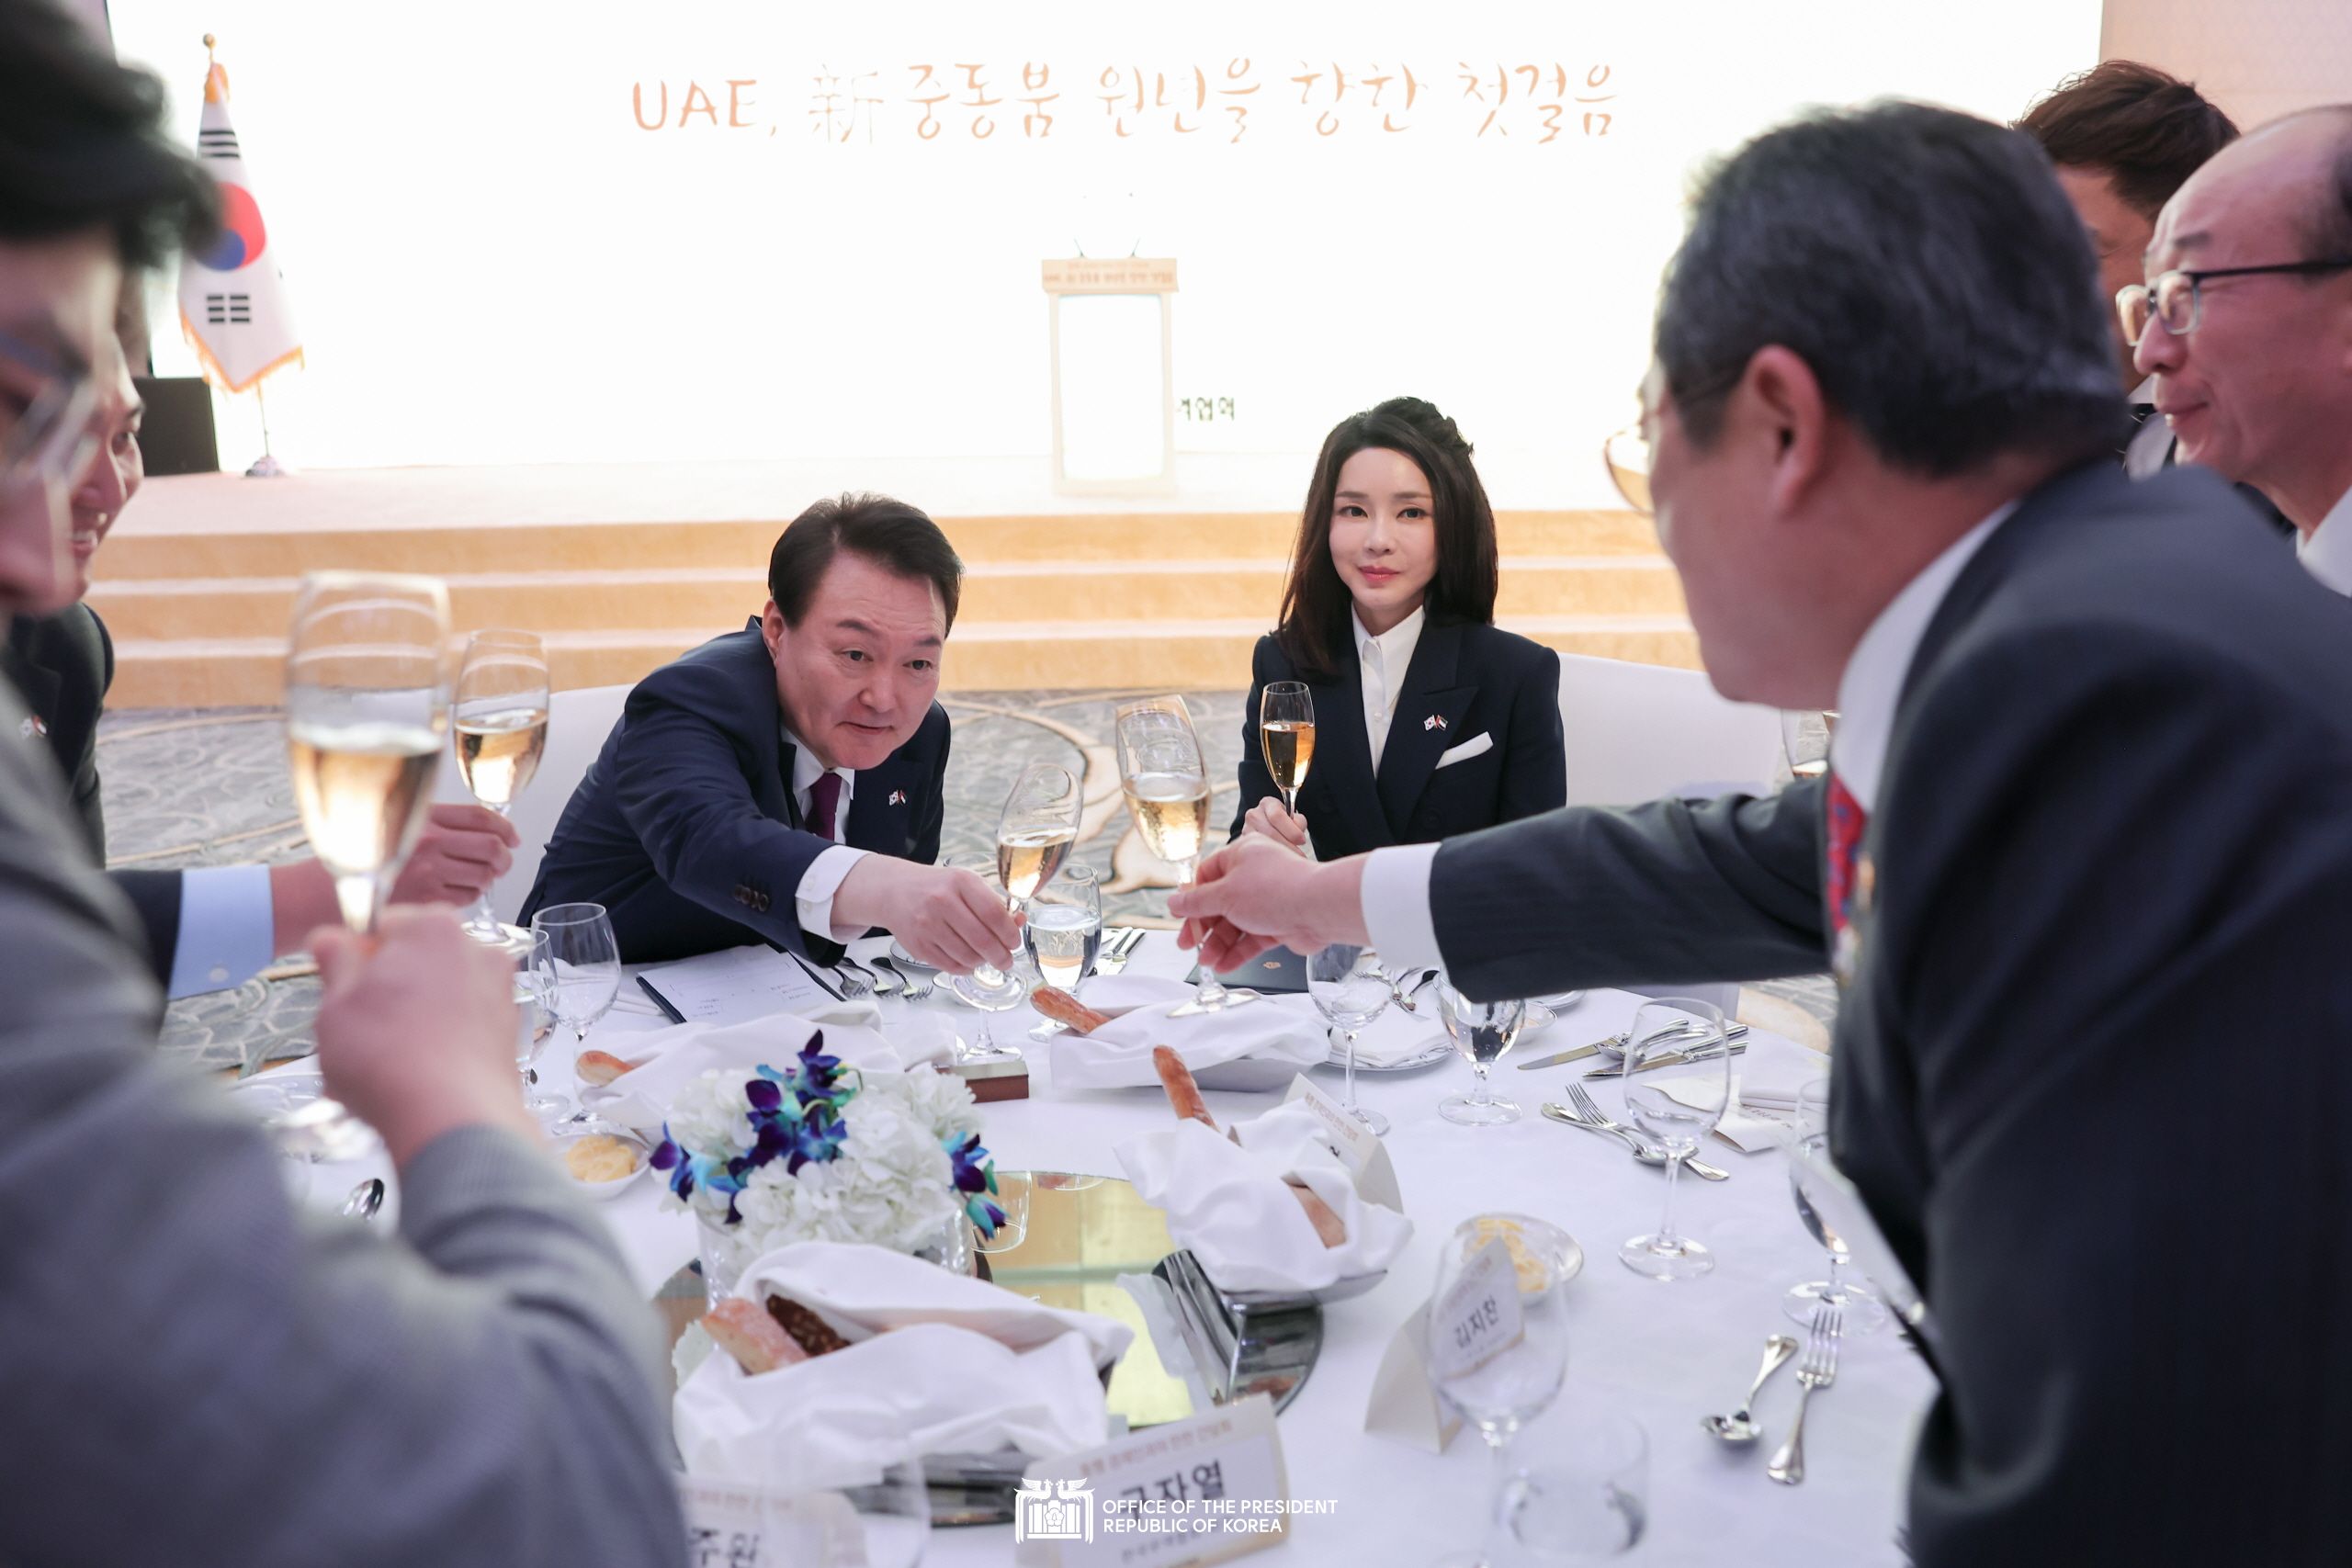 Holding a dinner meeting with members of the Korean business delegation that accompanied the President to the UAE slide 1